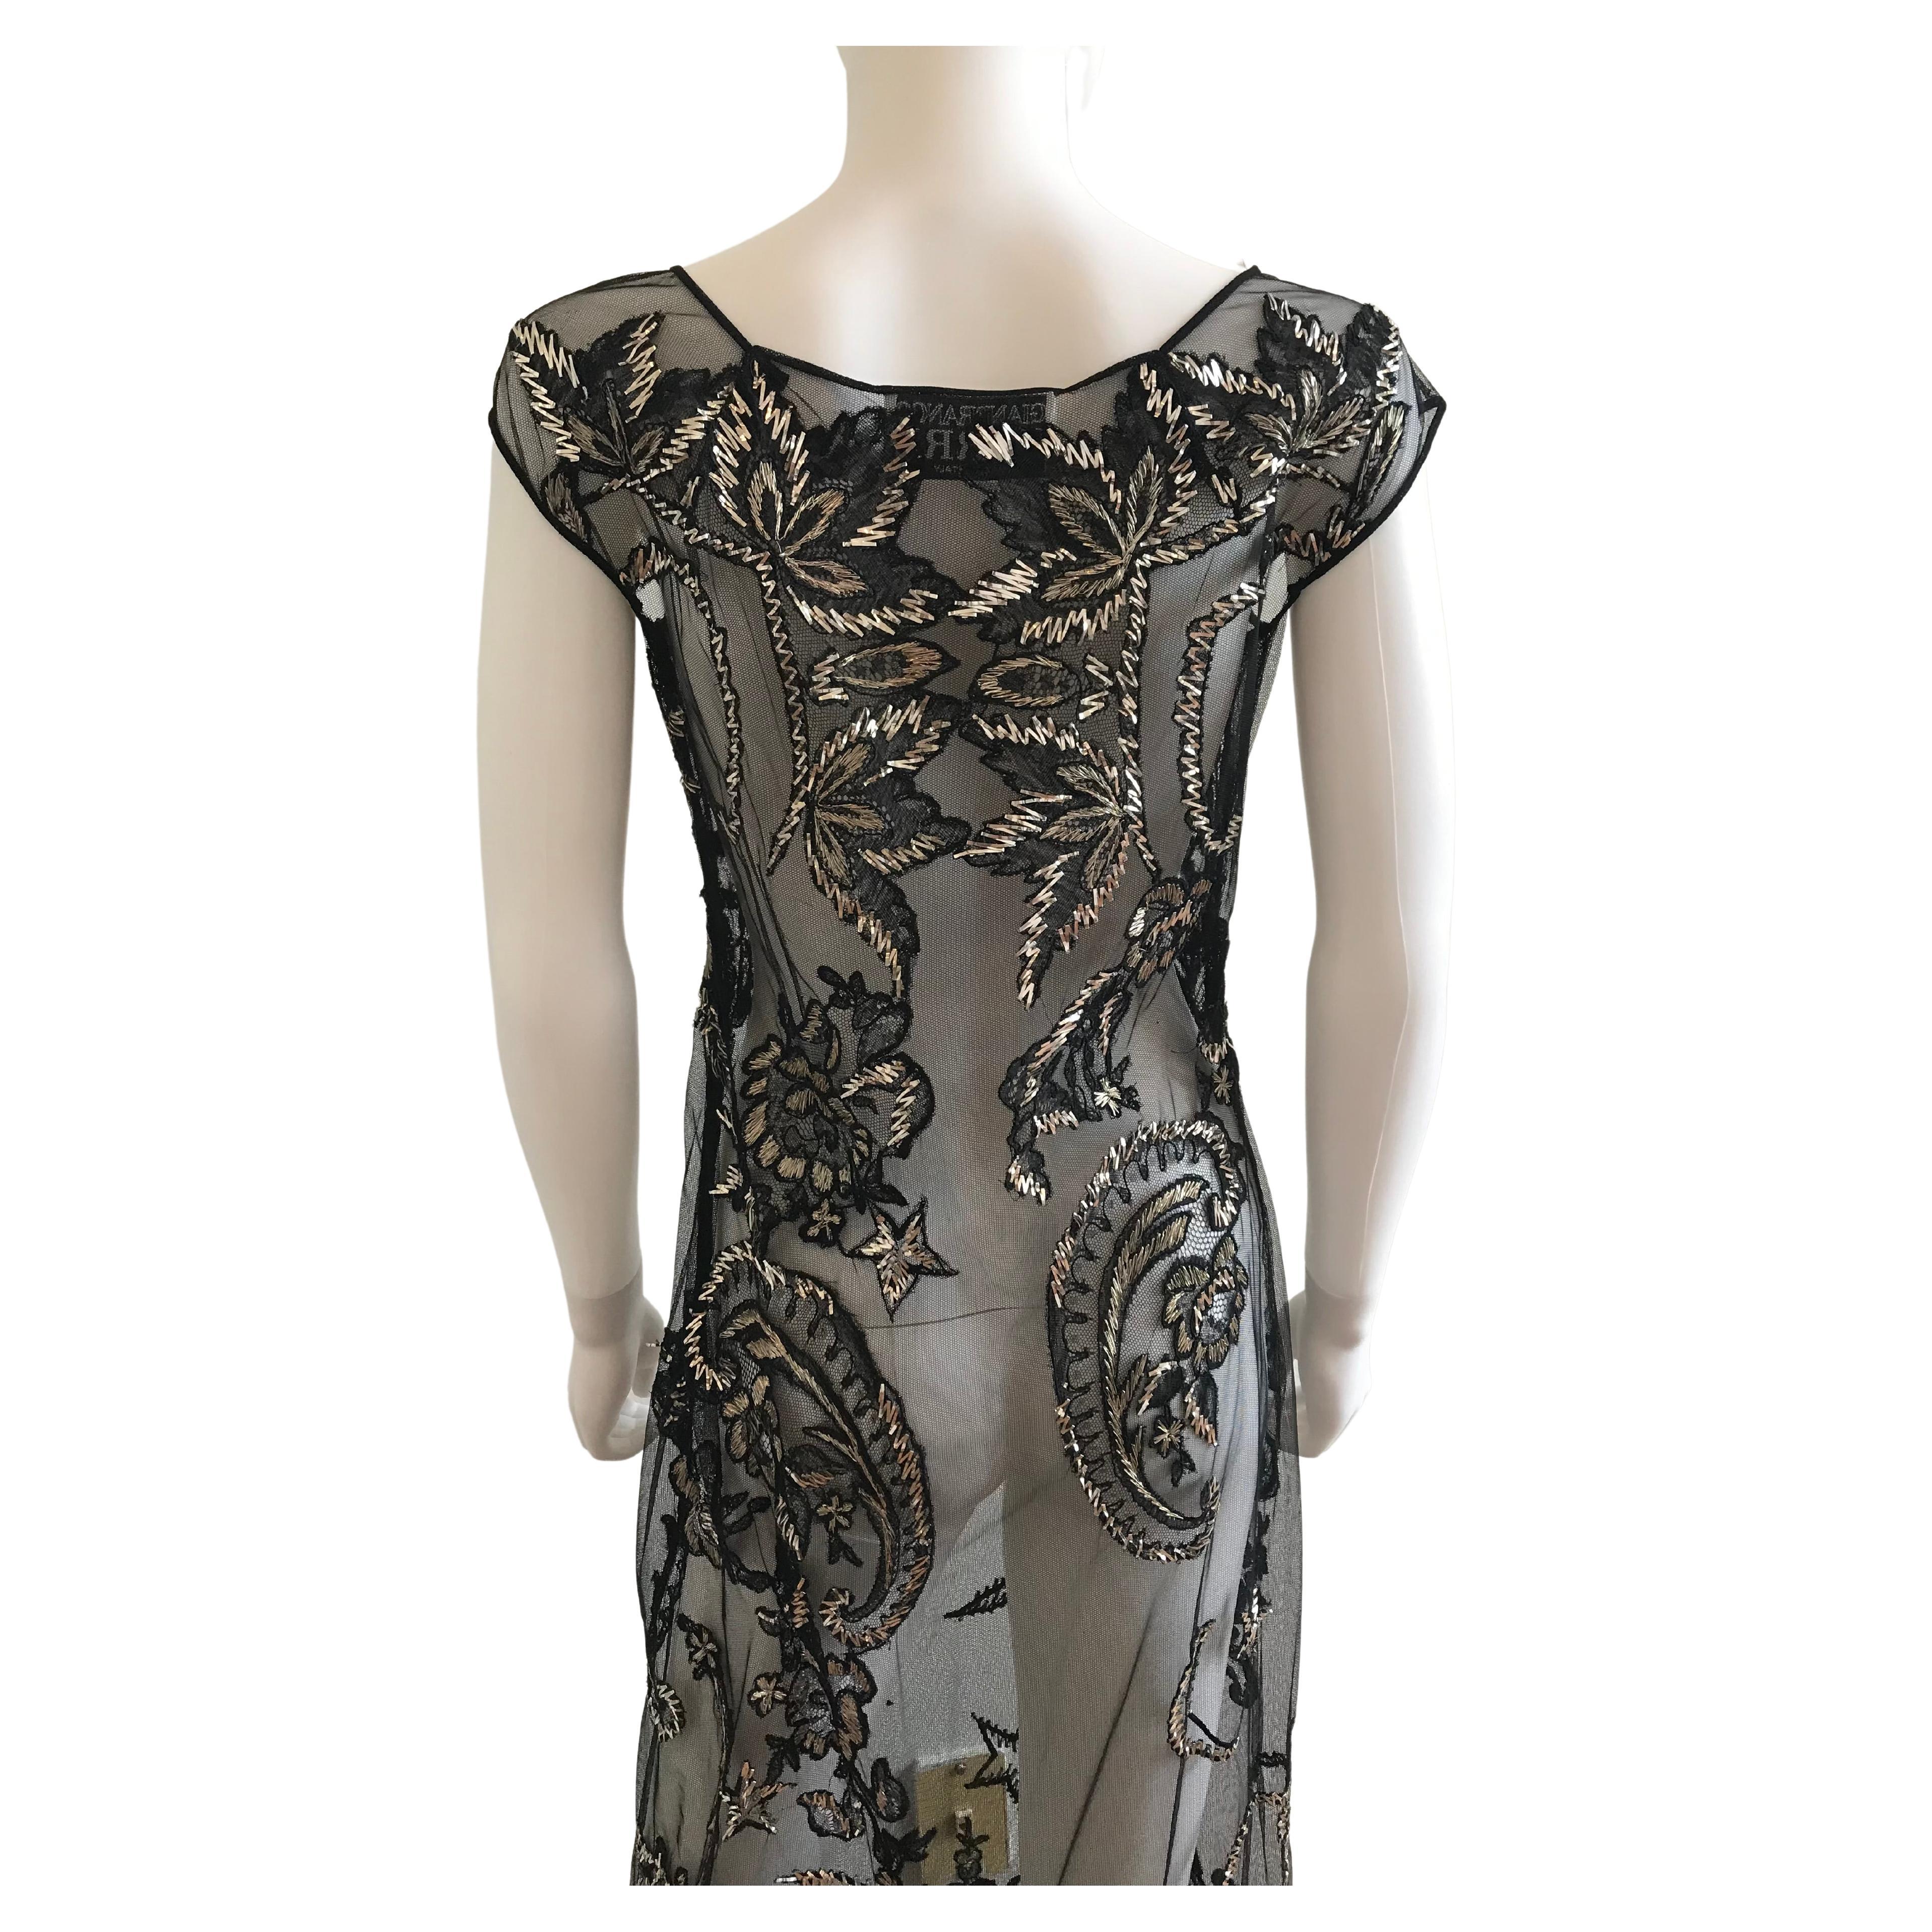 FW 1998 Gianfranco Ferre Metallic Embroidered Tulle Evening Gown For Sale 5